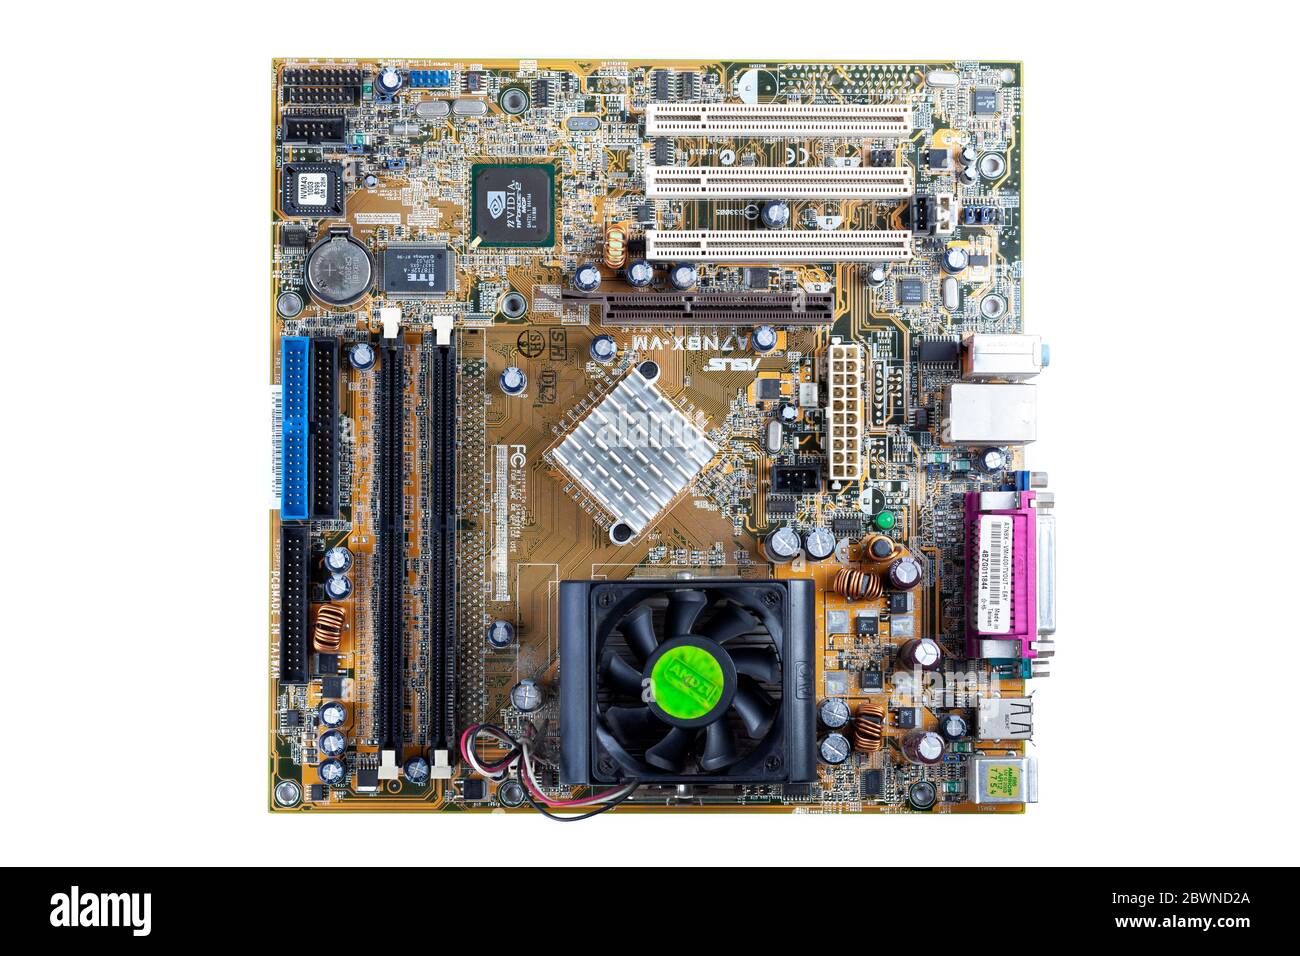 Old Asus A7N8X-VM PC motherboard with AMD A socket, stock cooler and Nvidia chipset top view, simple studio product shot from above isolated on white Stock Photo